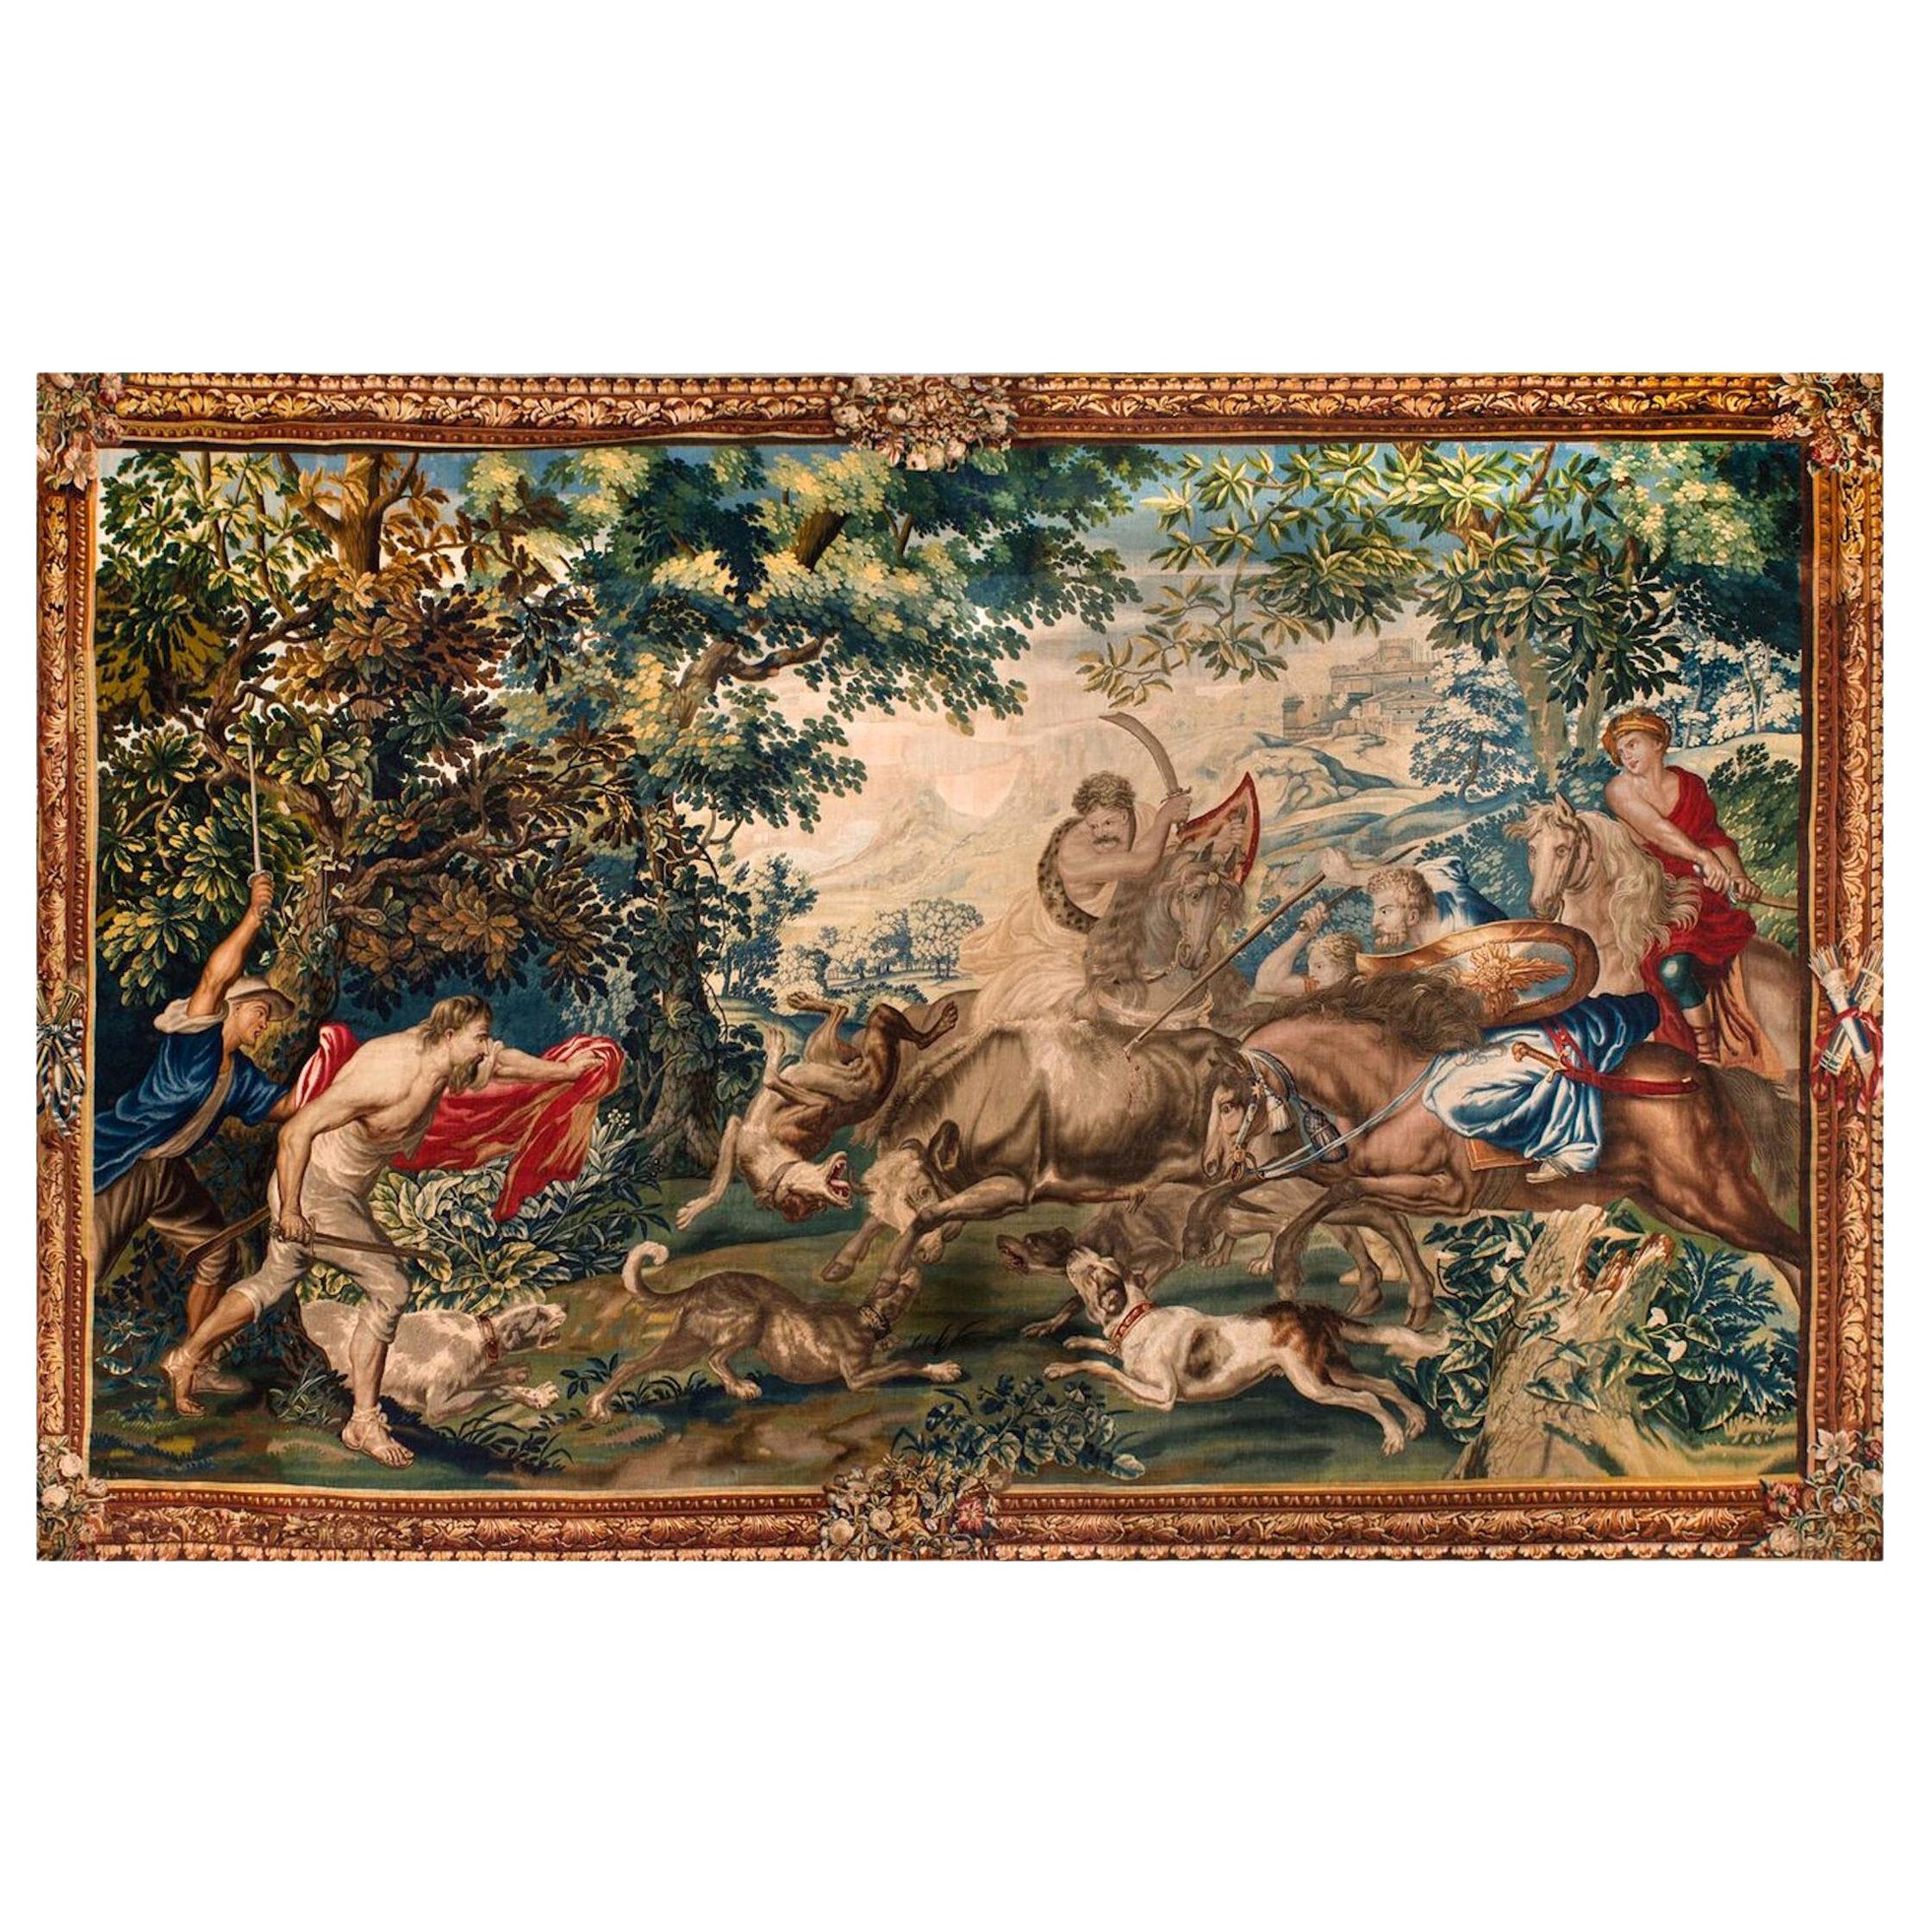 Outstanding Flemish Historical Tapestry The Bull Hunting, 17th Century